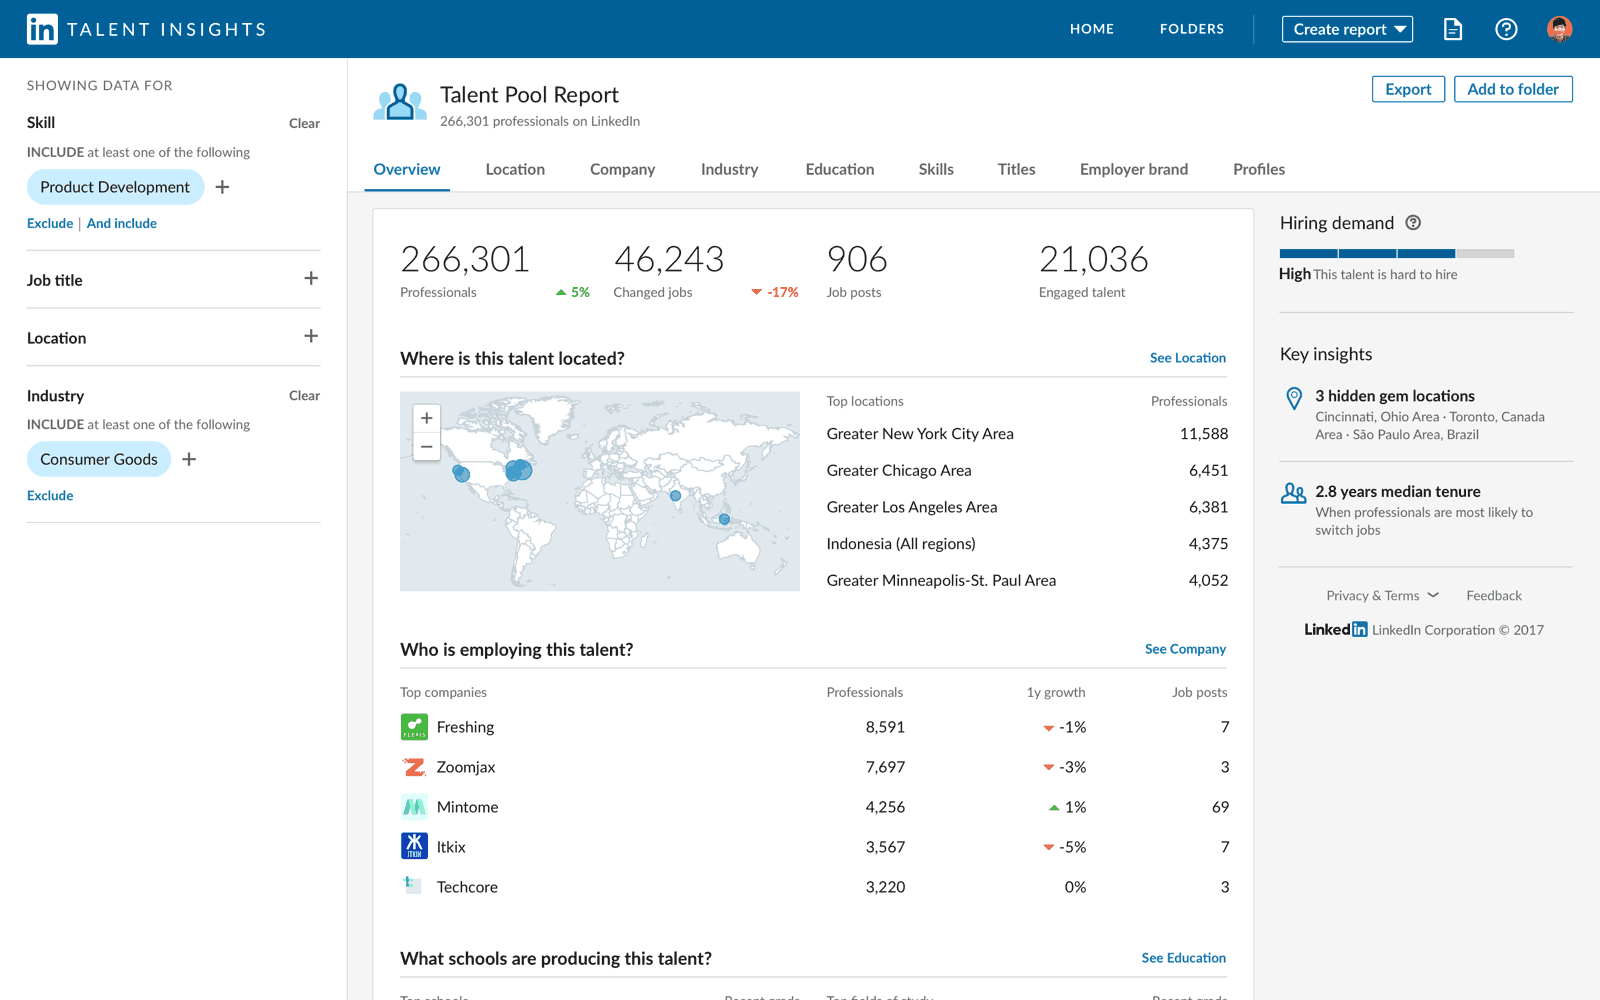 LinkedIn announces Talent Insights, data analysis for how to find, and keep, talented employees - OnMSFT.com - September 25, 2018